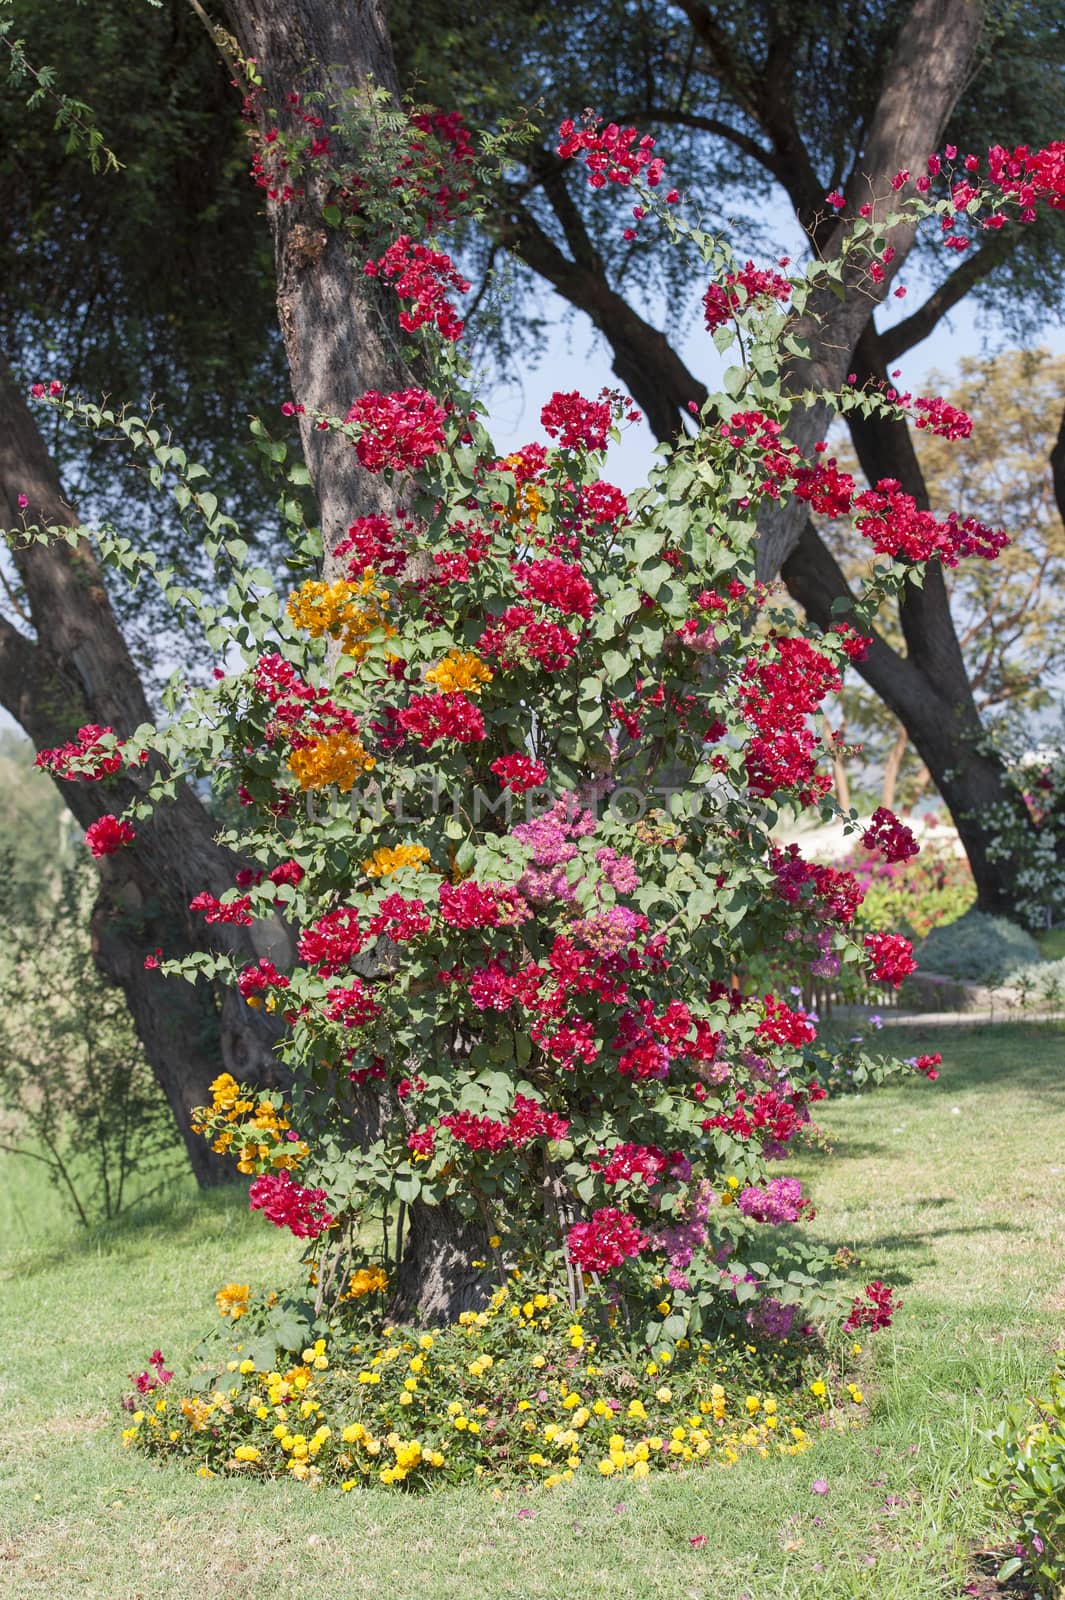 Several bougainvillea bushes of different colours growing around a tree